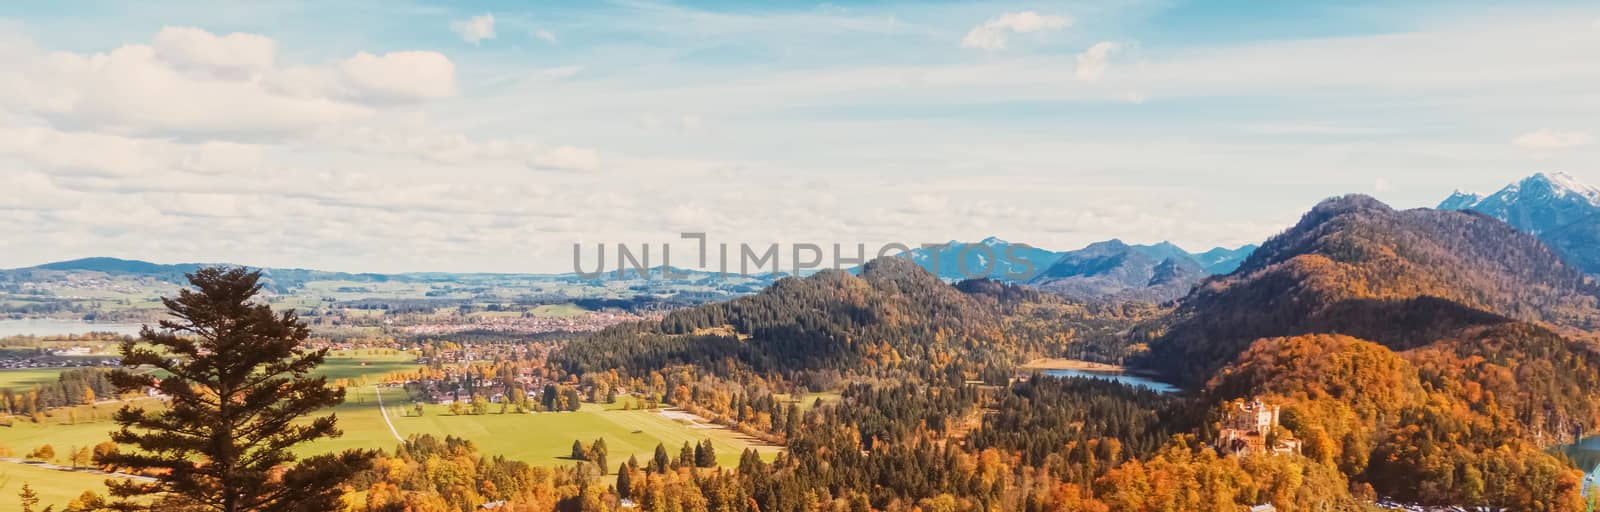 Beautiful nature of European Alps, landscape view of alpine mountains, lake and village in autumn season, travel and destination scenery